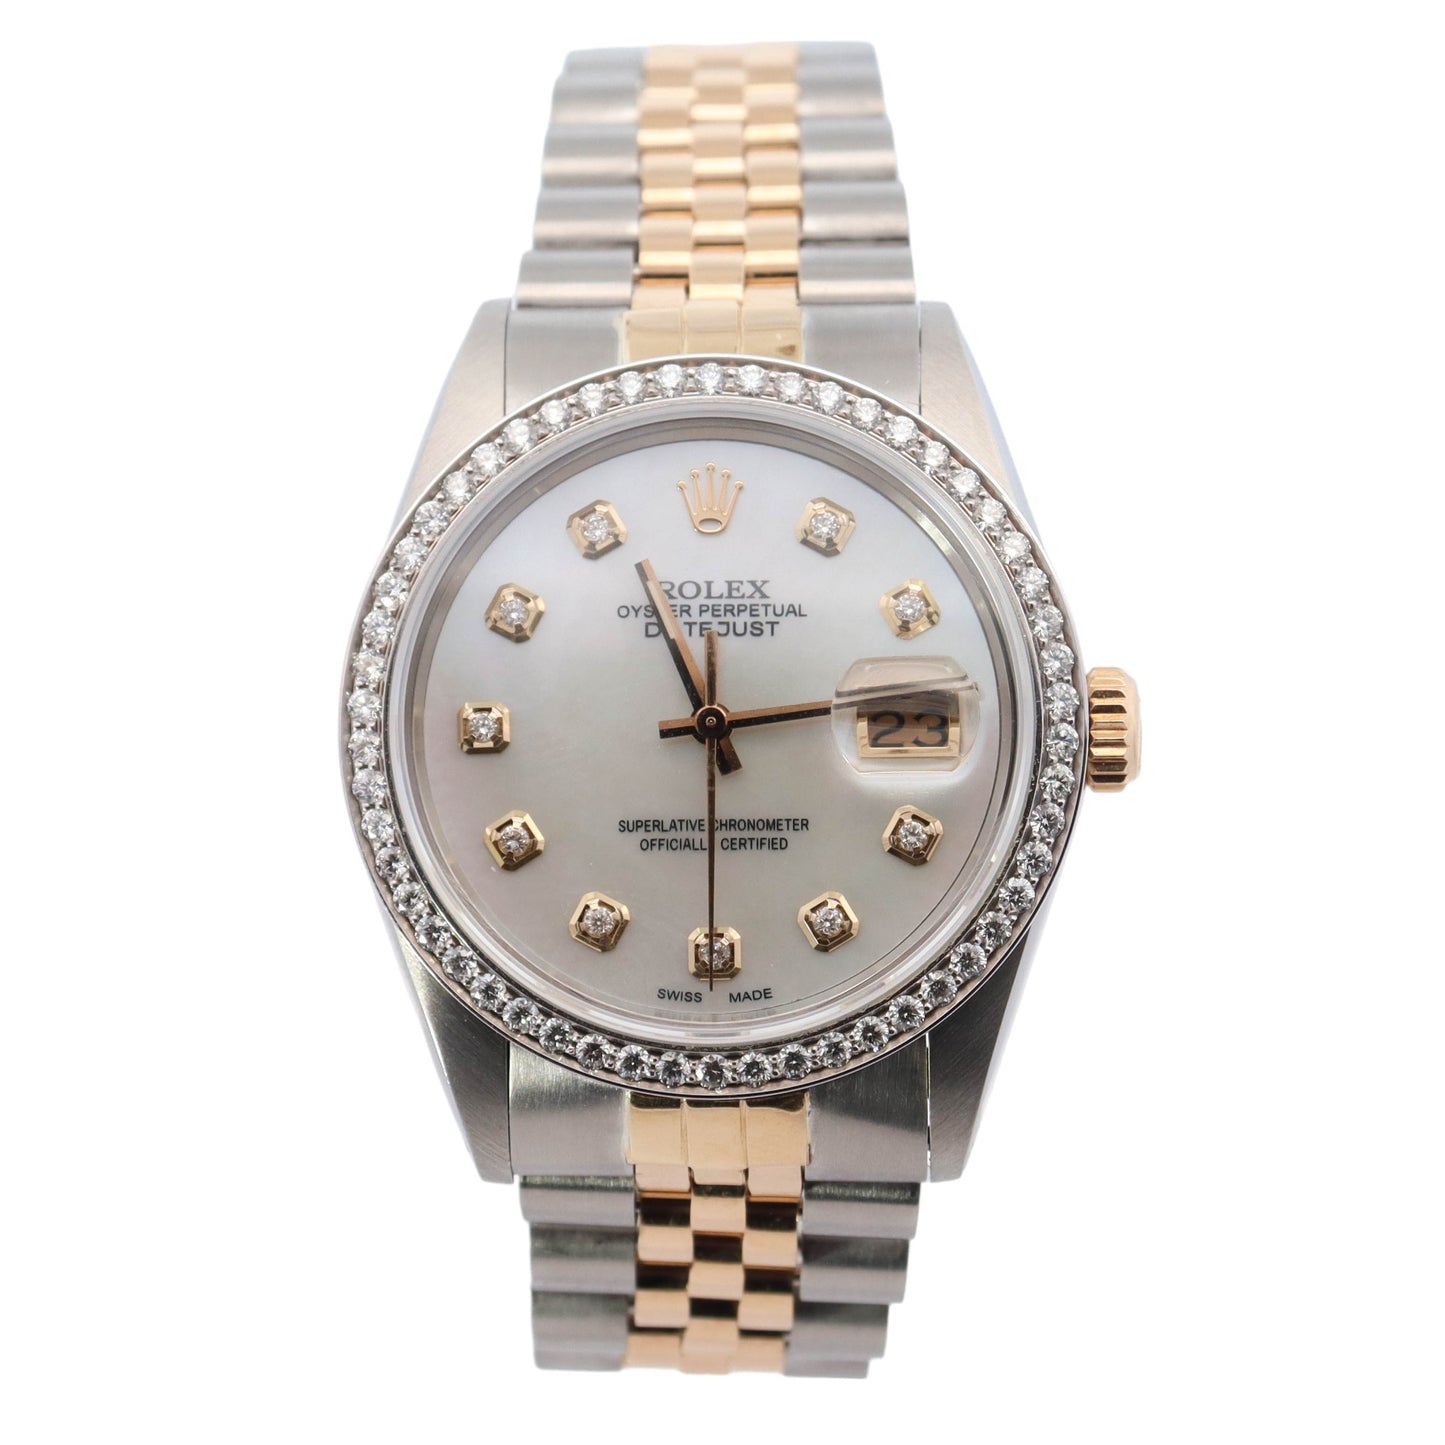 Rolex Datejust Yellow Gold & Stainless 36mm Custom White MOP Diamond Dial Watch Reference# 16013